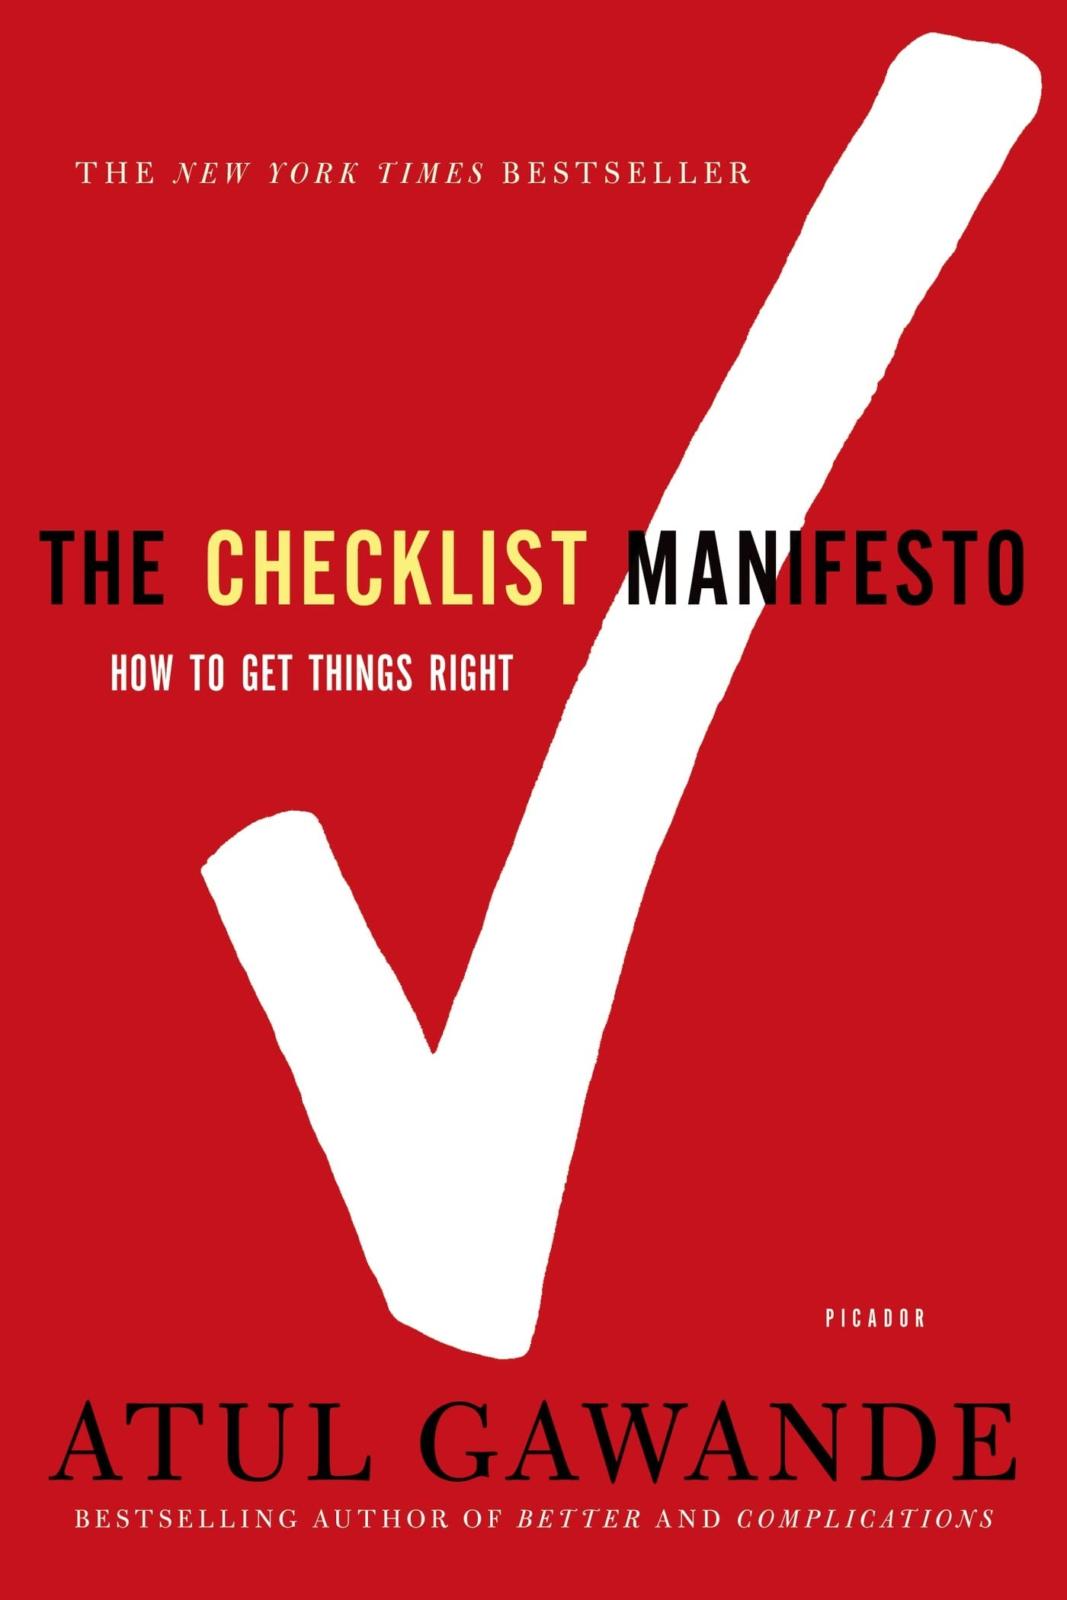 The Checklist Manifesto: How to Get Things Right, by Atul Gawande